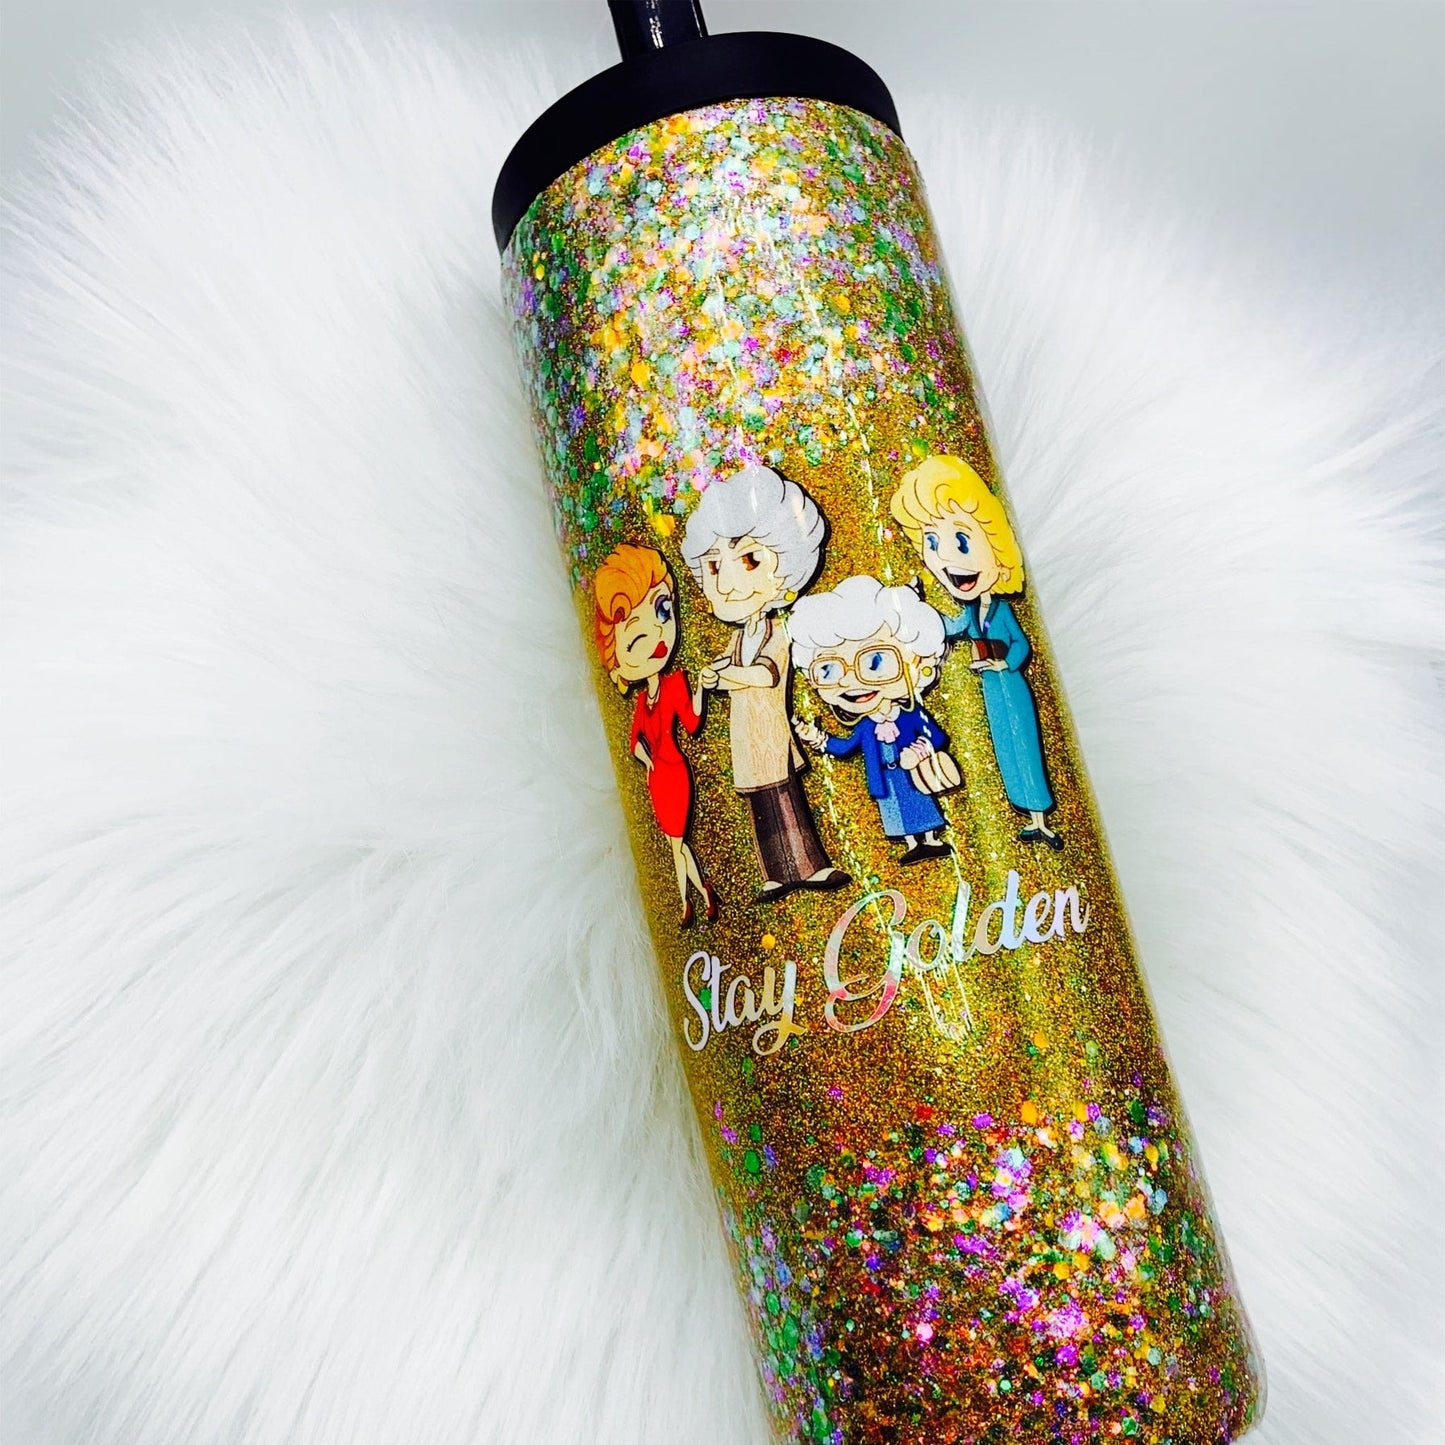 Stay Golden 20oz Stainless Steel Tumbler - Joanell Creations